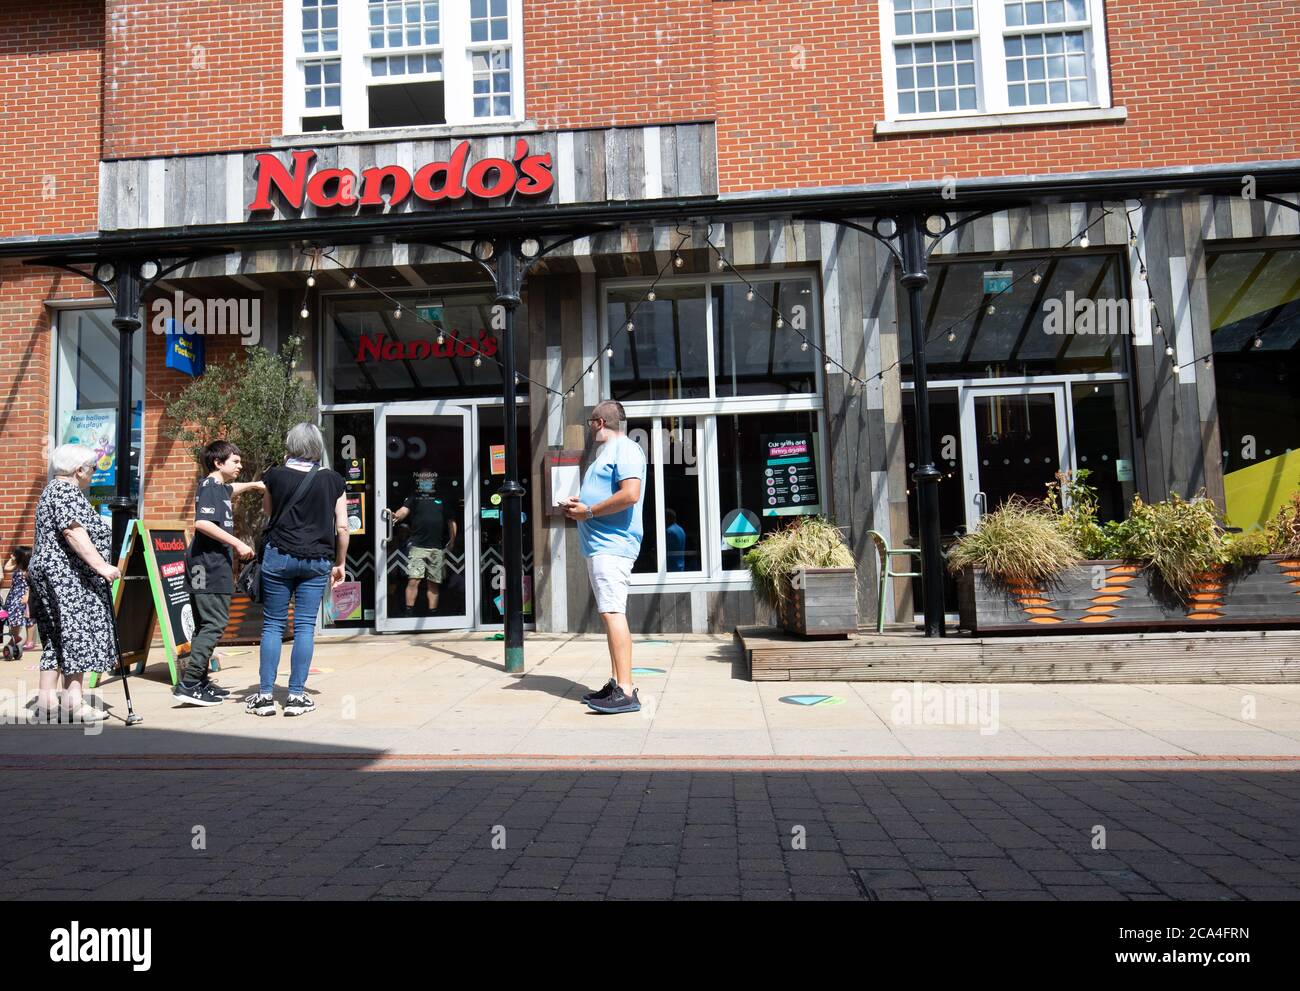 Sevenoaks, Kent,4th August 2020, People passing Nando's restaurant in Sevenoaks, Kent. The forecast is for 20C sunny with a gentle breeze and is to get hotter as the week continues with temperatures expected of 32C or more on Friday. Credit: Keith Larby/Alamy Live News Stock Photo